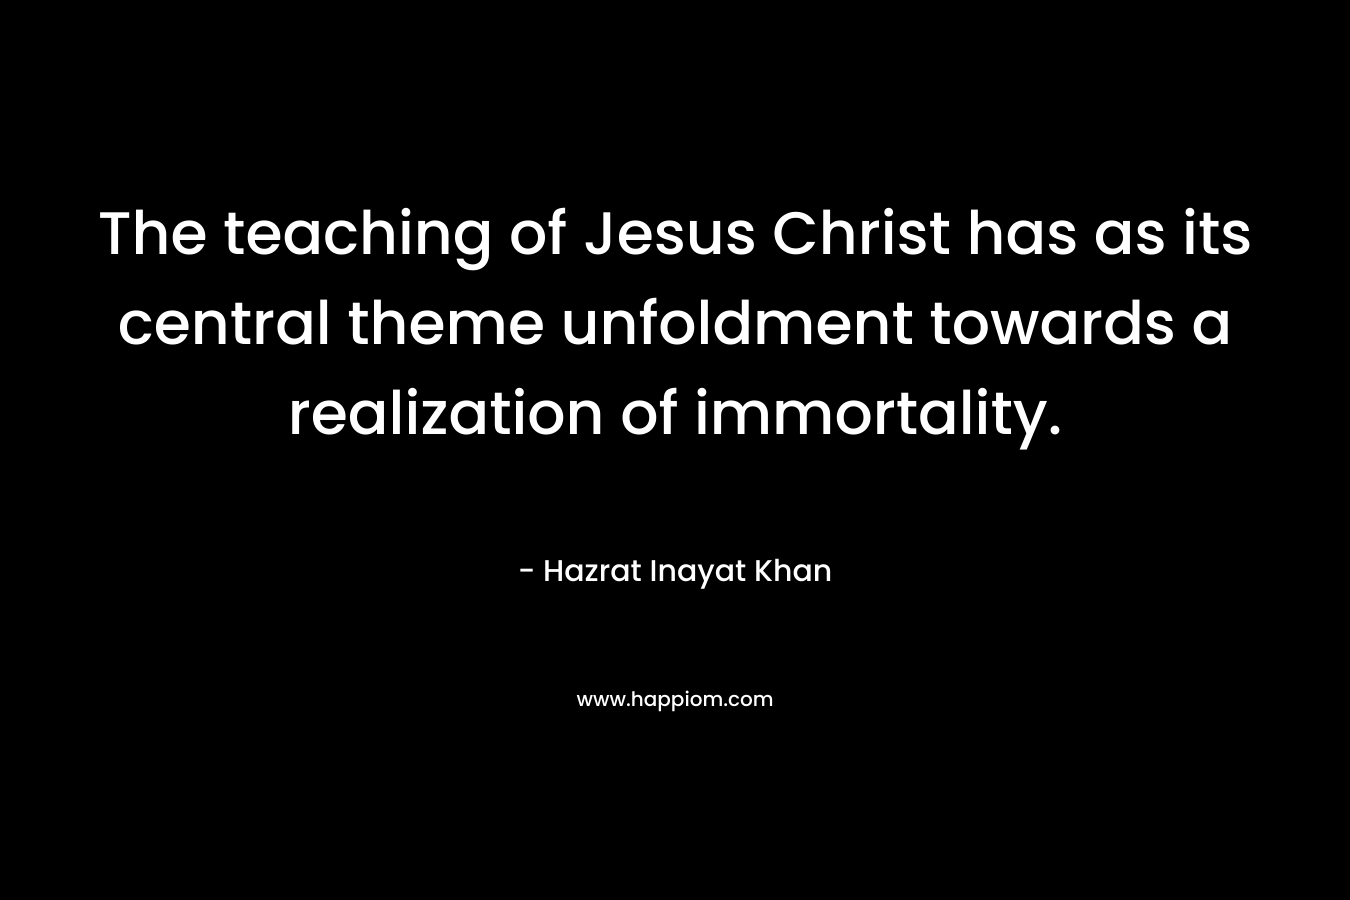 The teaching of Jesus Christ has as its central theme unfoldment towards a realization of immortality. – Hazrat Inayat Khan